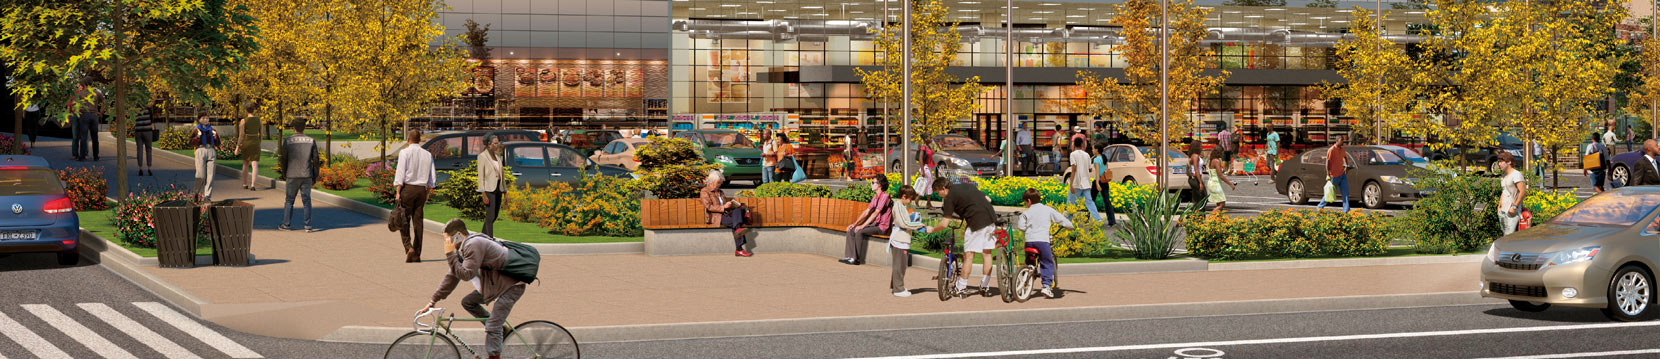 Site Rendering (Illustrative) Edgemere Commons - Contracting & Jobs